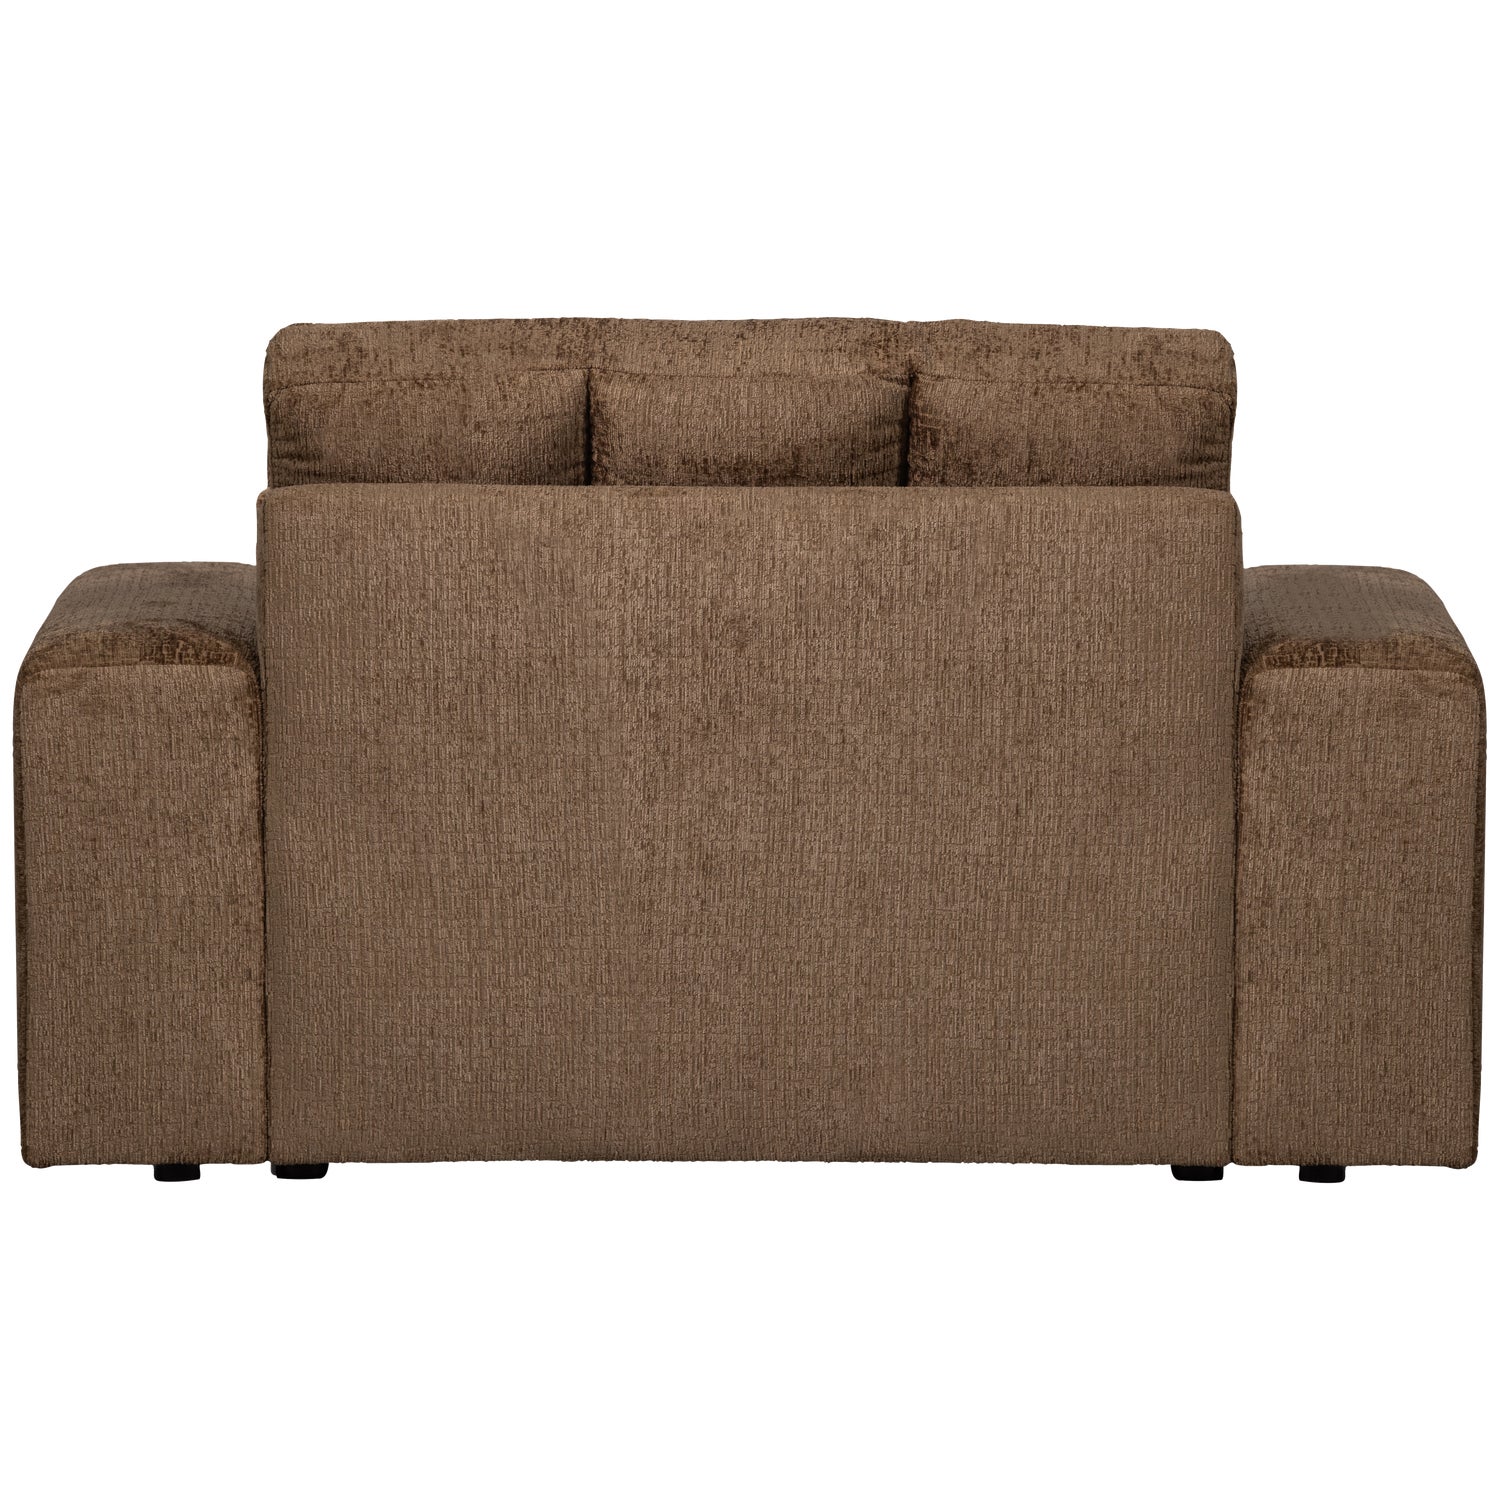 379006-BR-02_VS_WE_second_date_loveseat_structure_velvet_brass_AK1.png?auto=webp&format=png&width=1500&height=1500